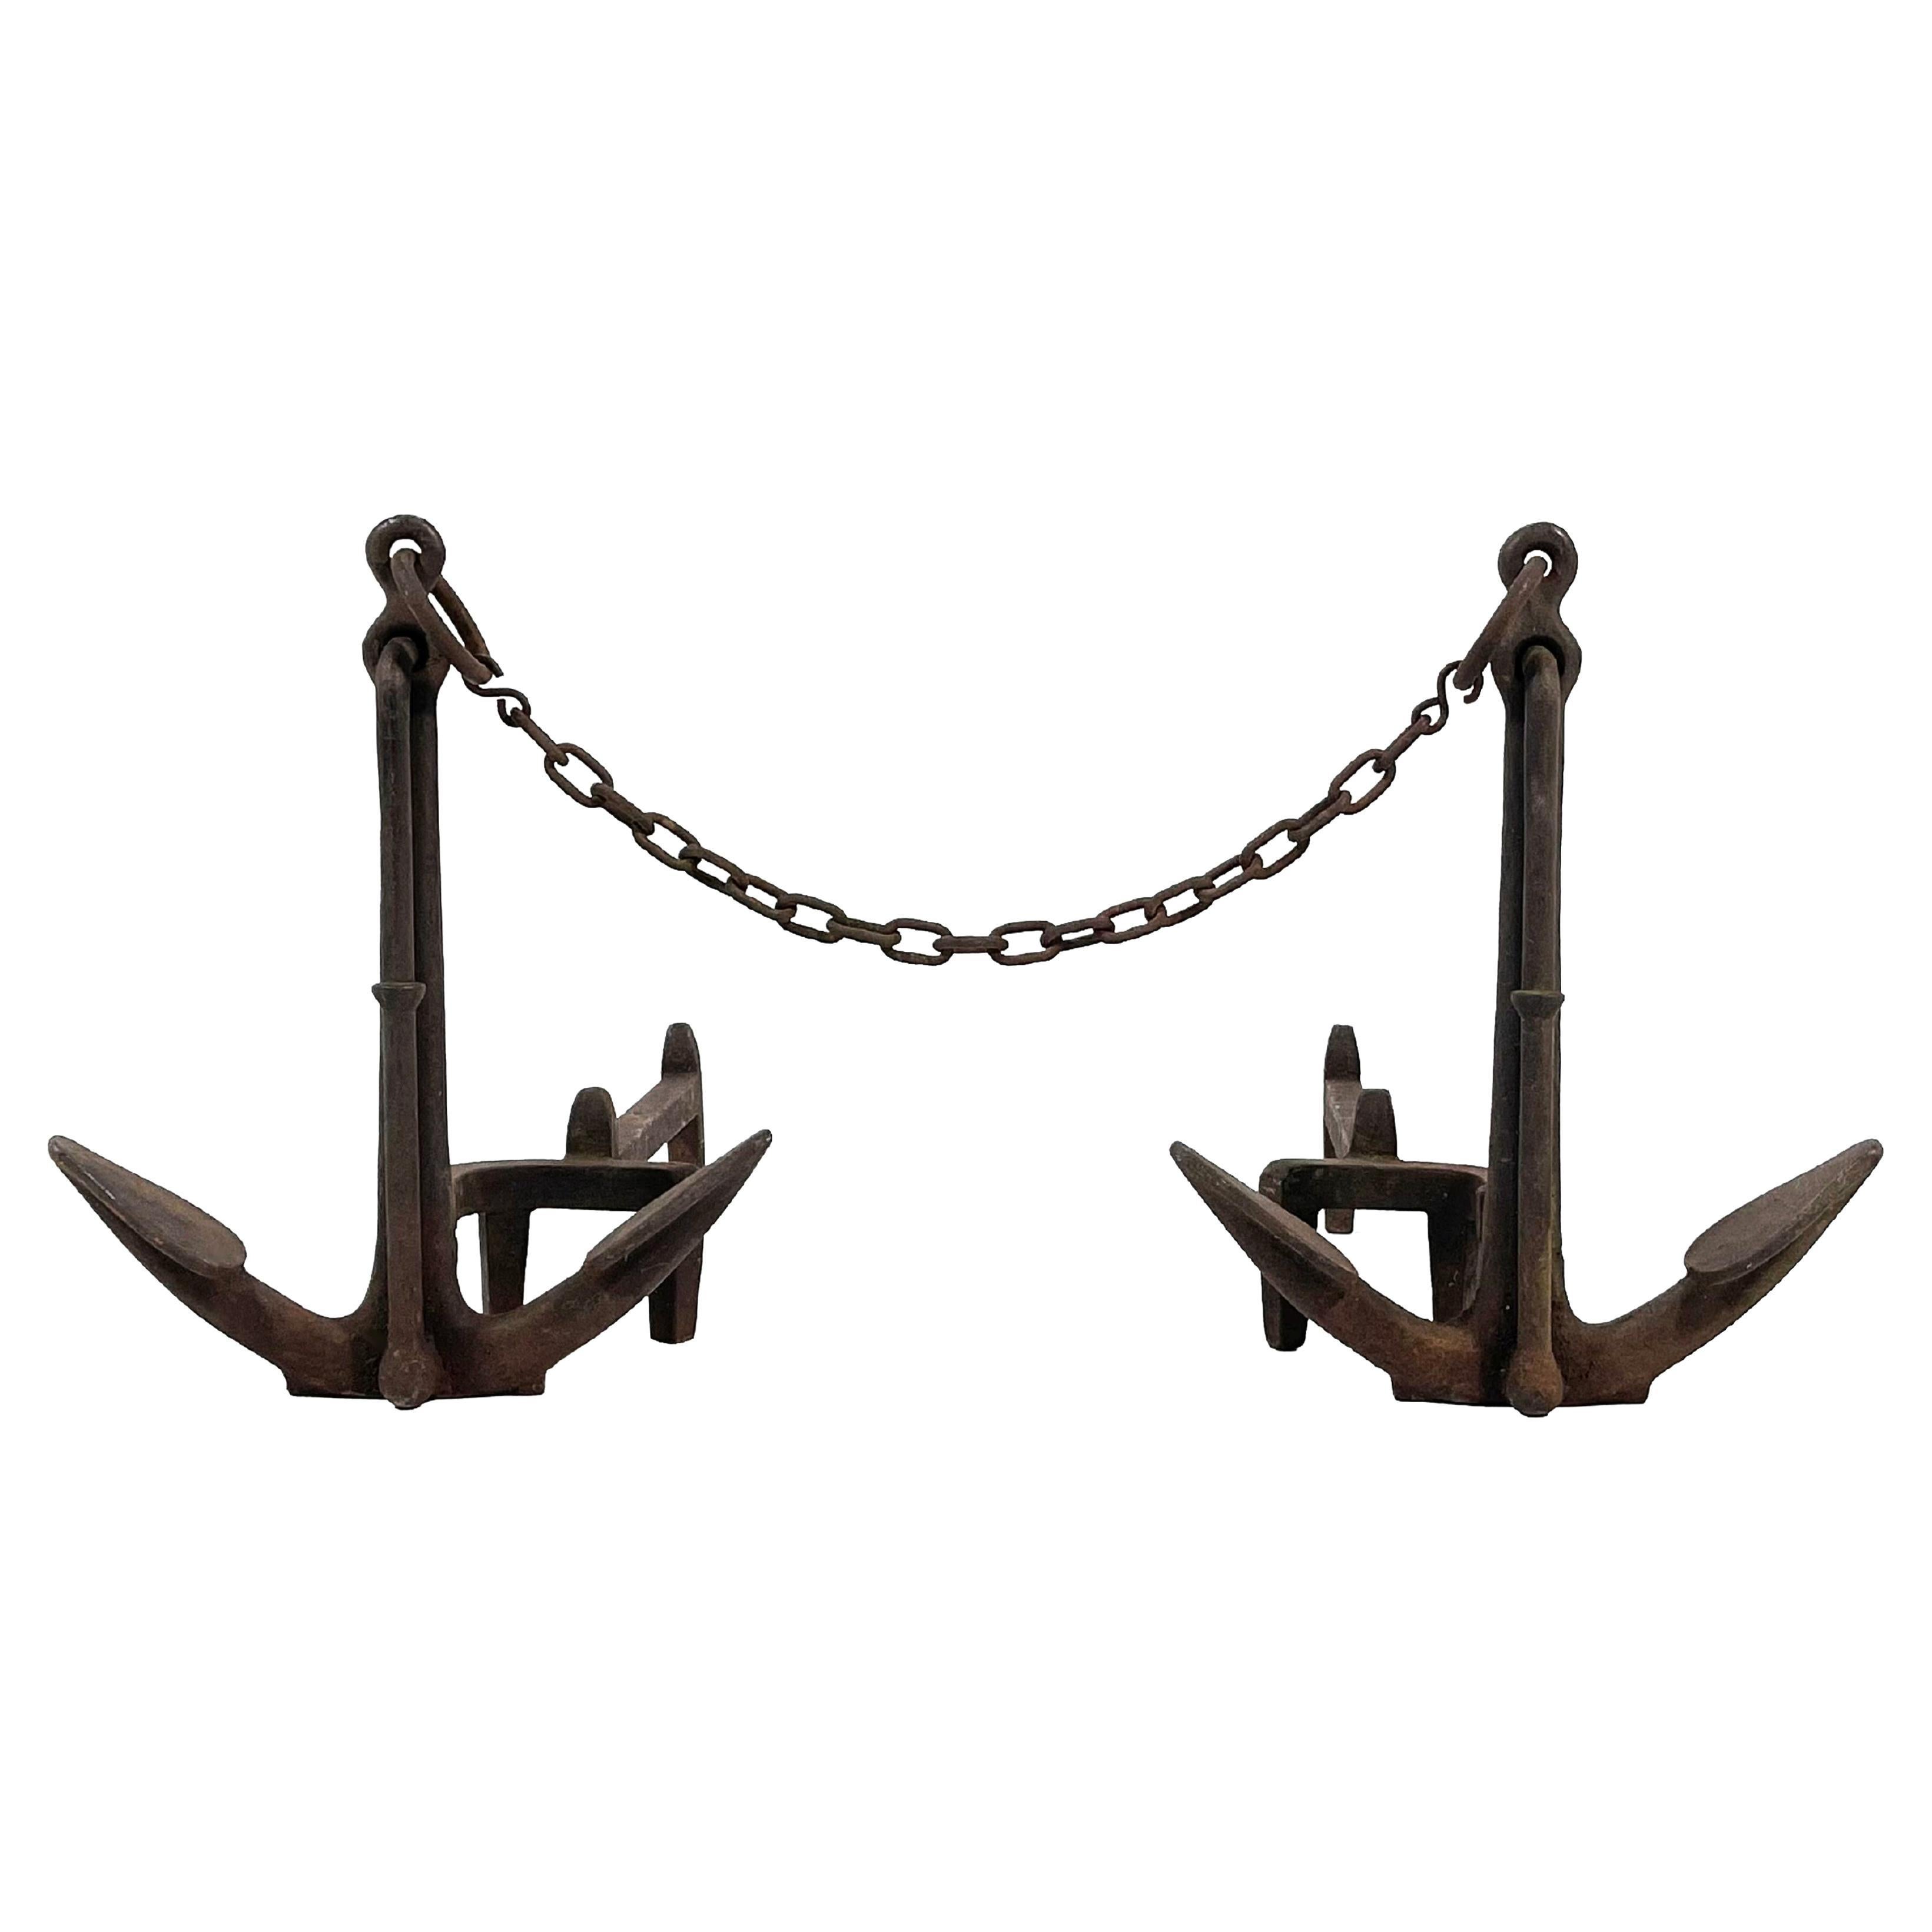 Pair of American Cast Iron Anchor Andirons